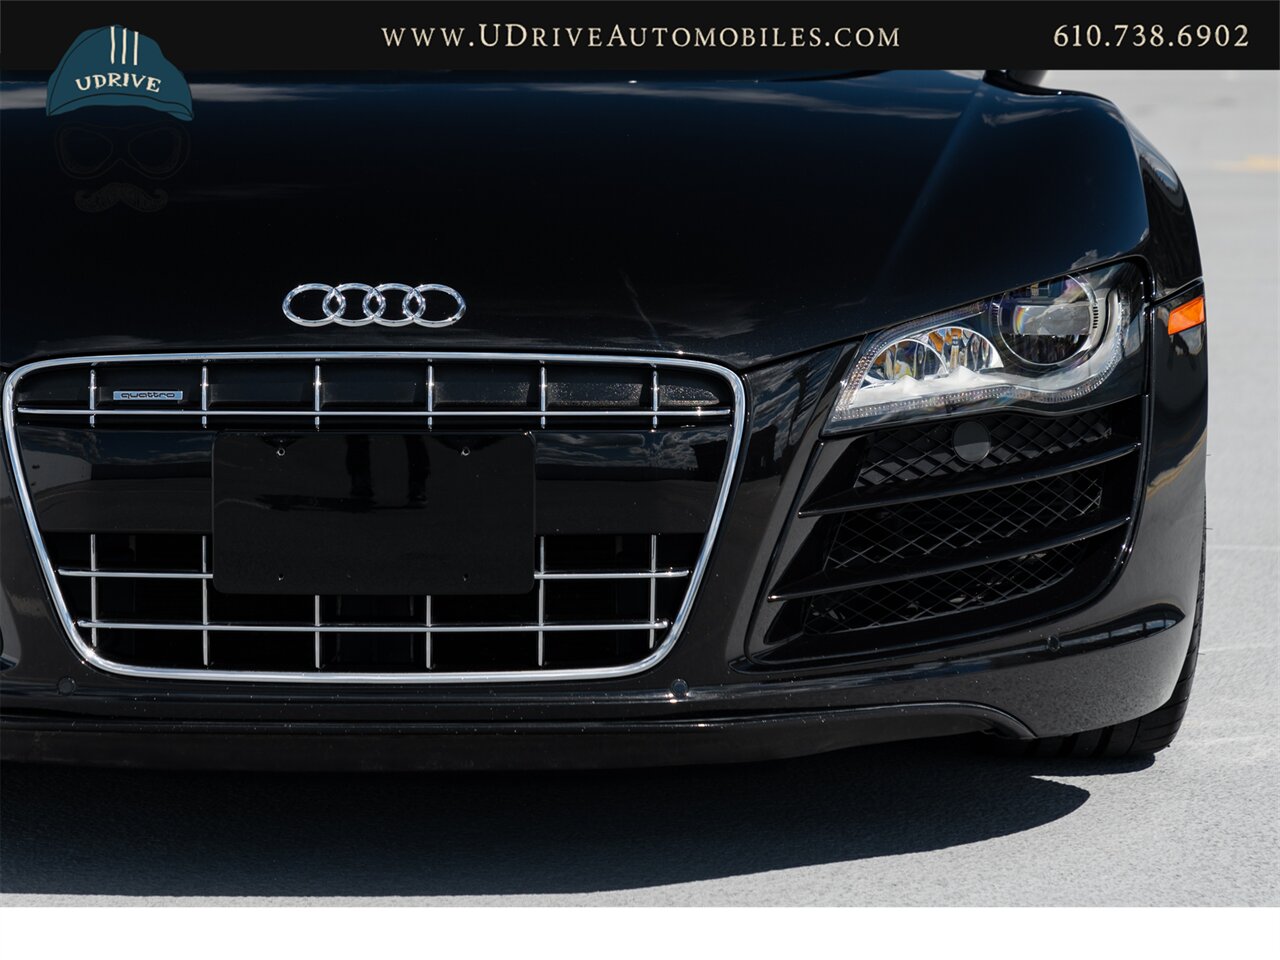 2011 Audi R8 5.2 Quattro  V10 6 Speed Manual - Photo 12 - West Chester, PA 19382